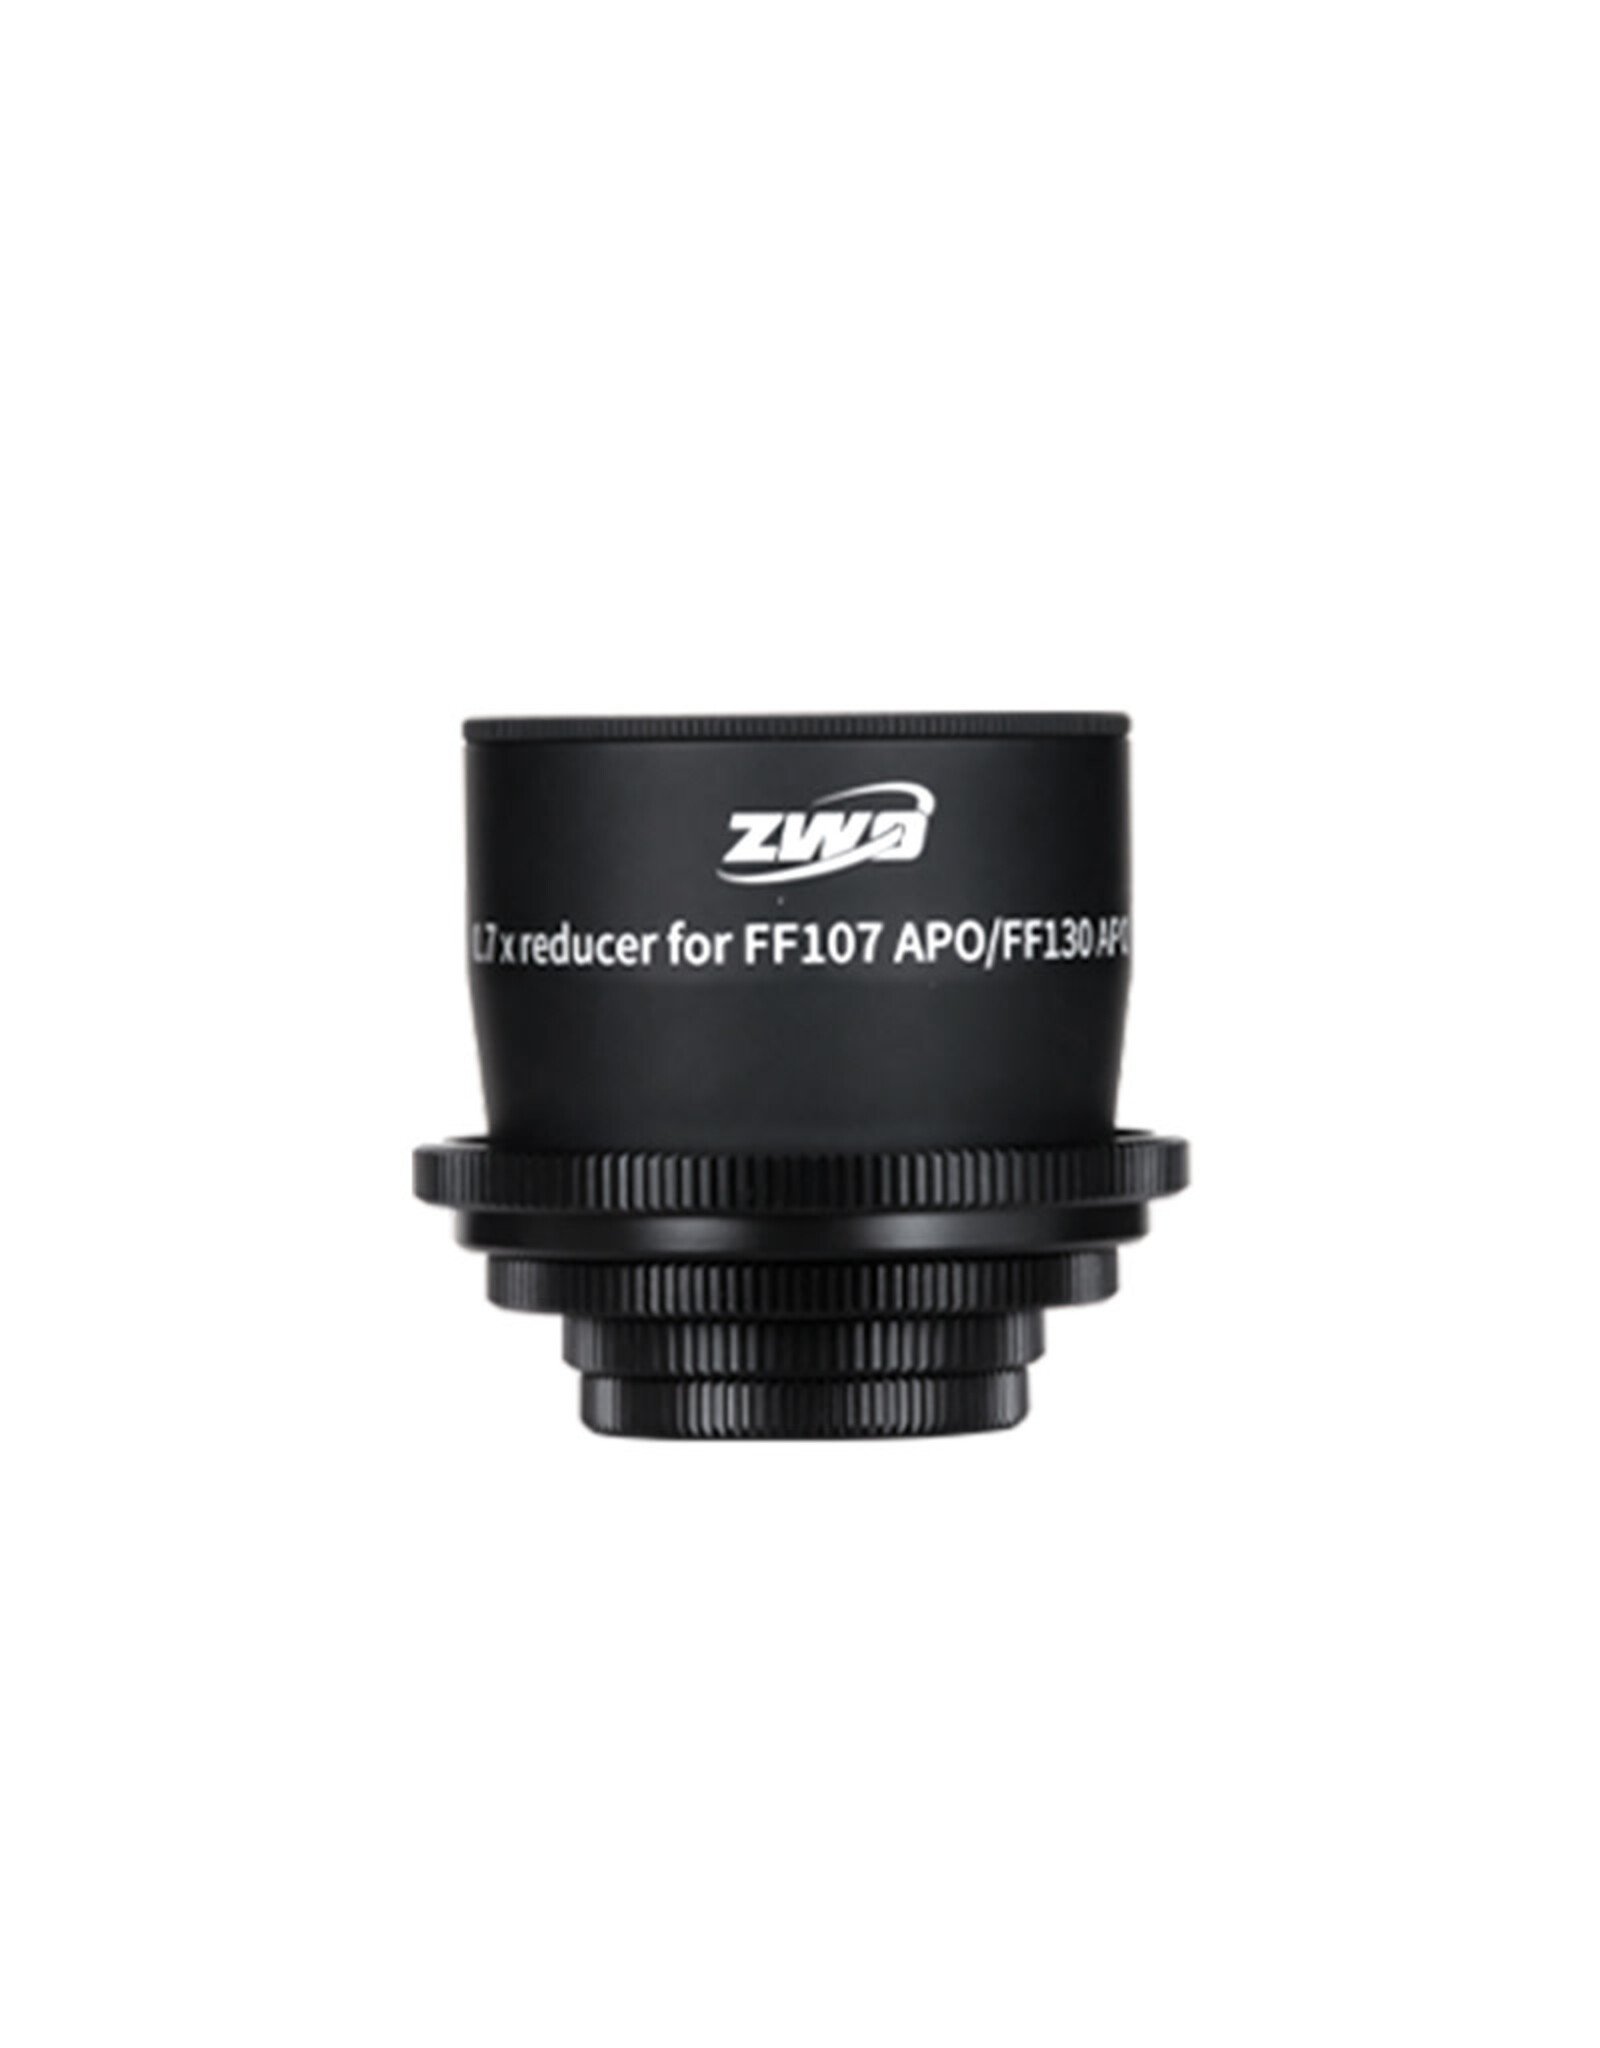 ZWO ZWO 0.7x Full-Frame Reducer for FF107-APO and FF130-APO Refractors